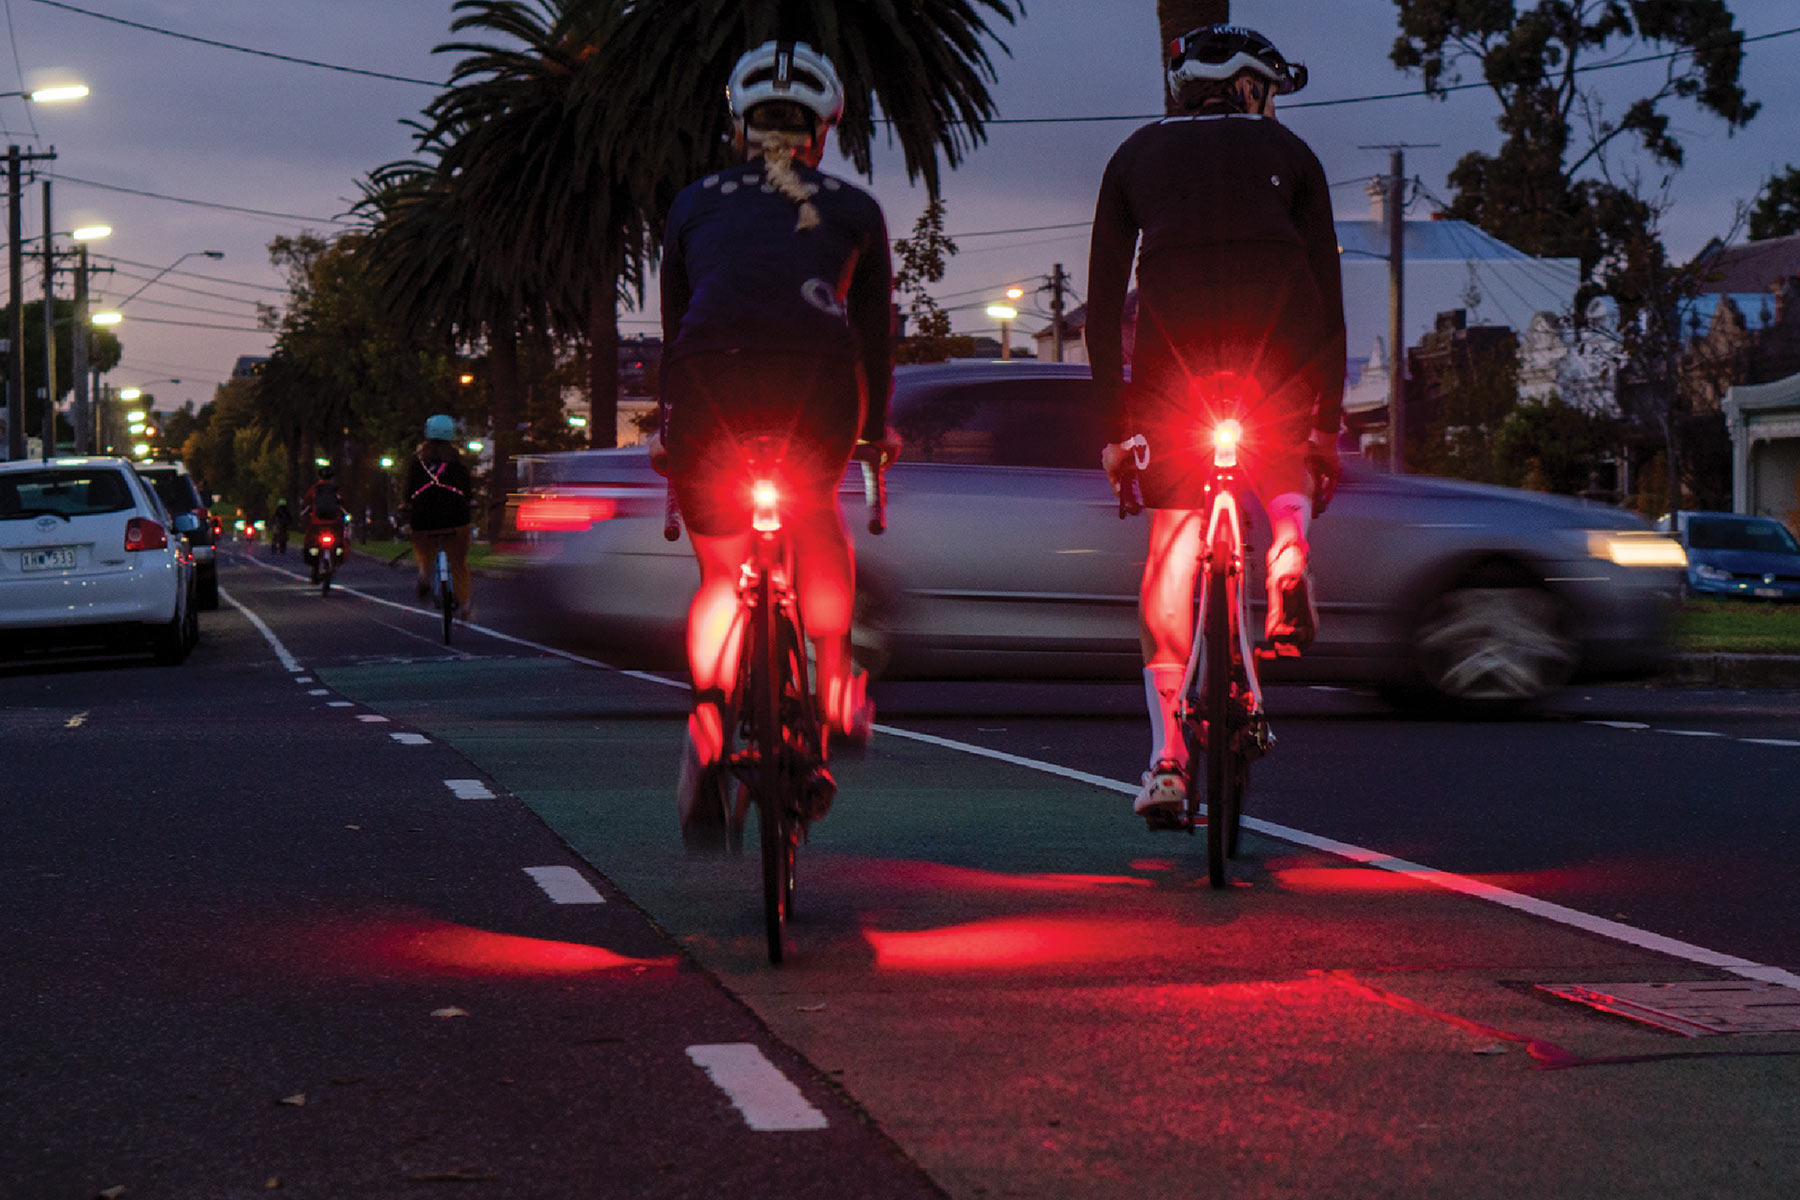 Project Flock Light unique biomotion increased visibility cycling taillight, increased safety